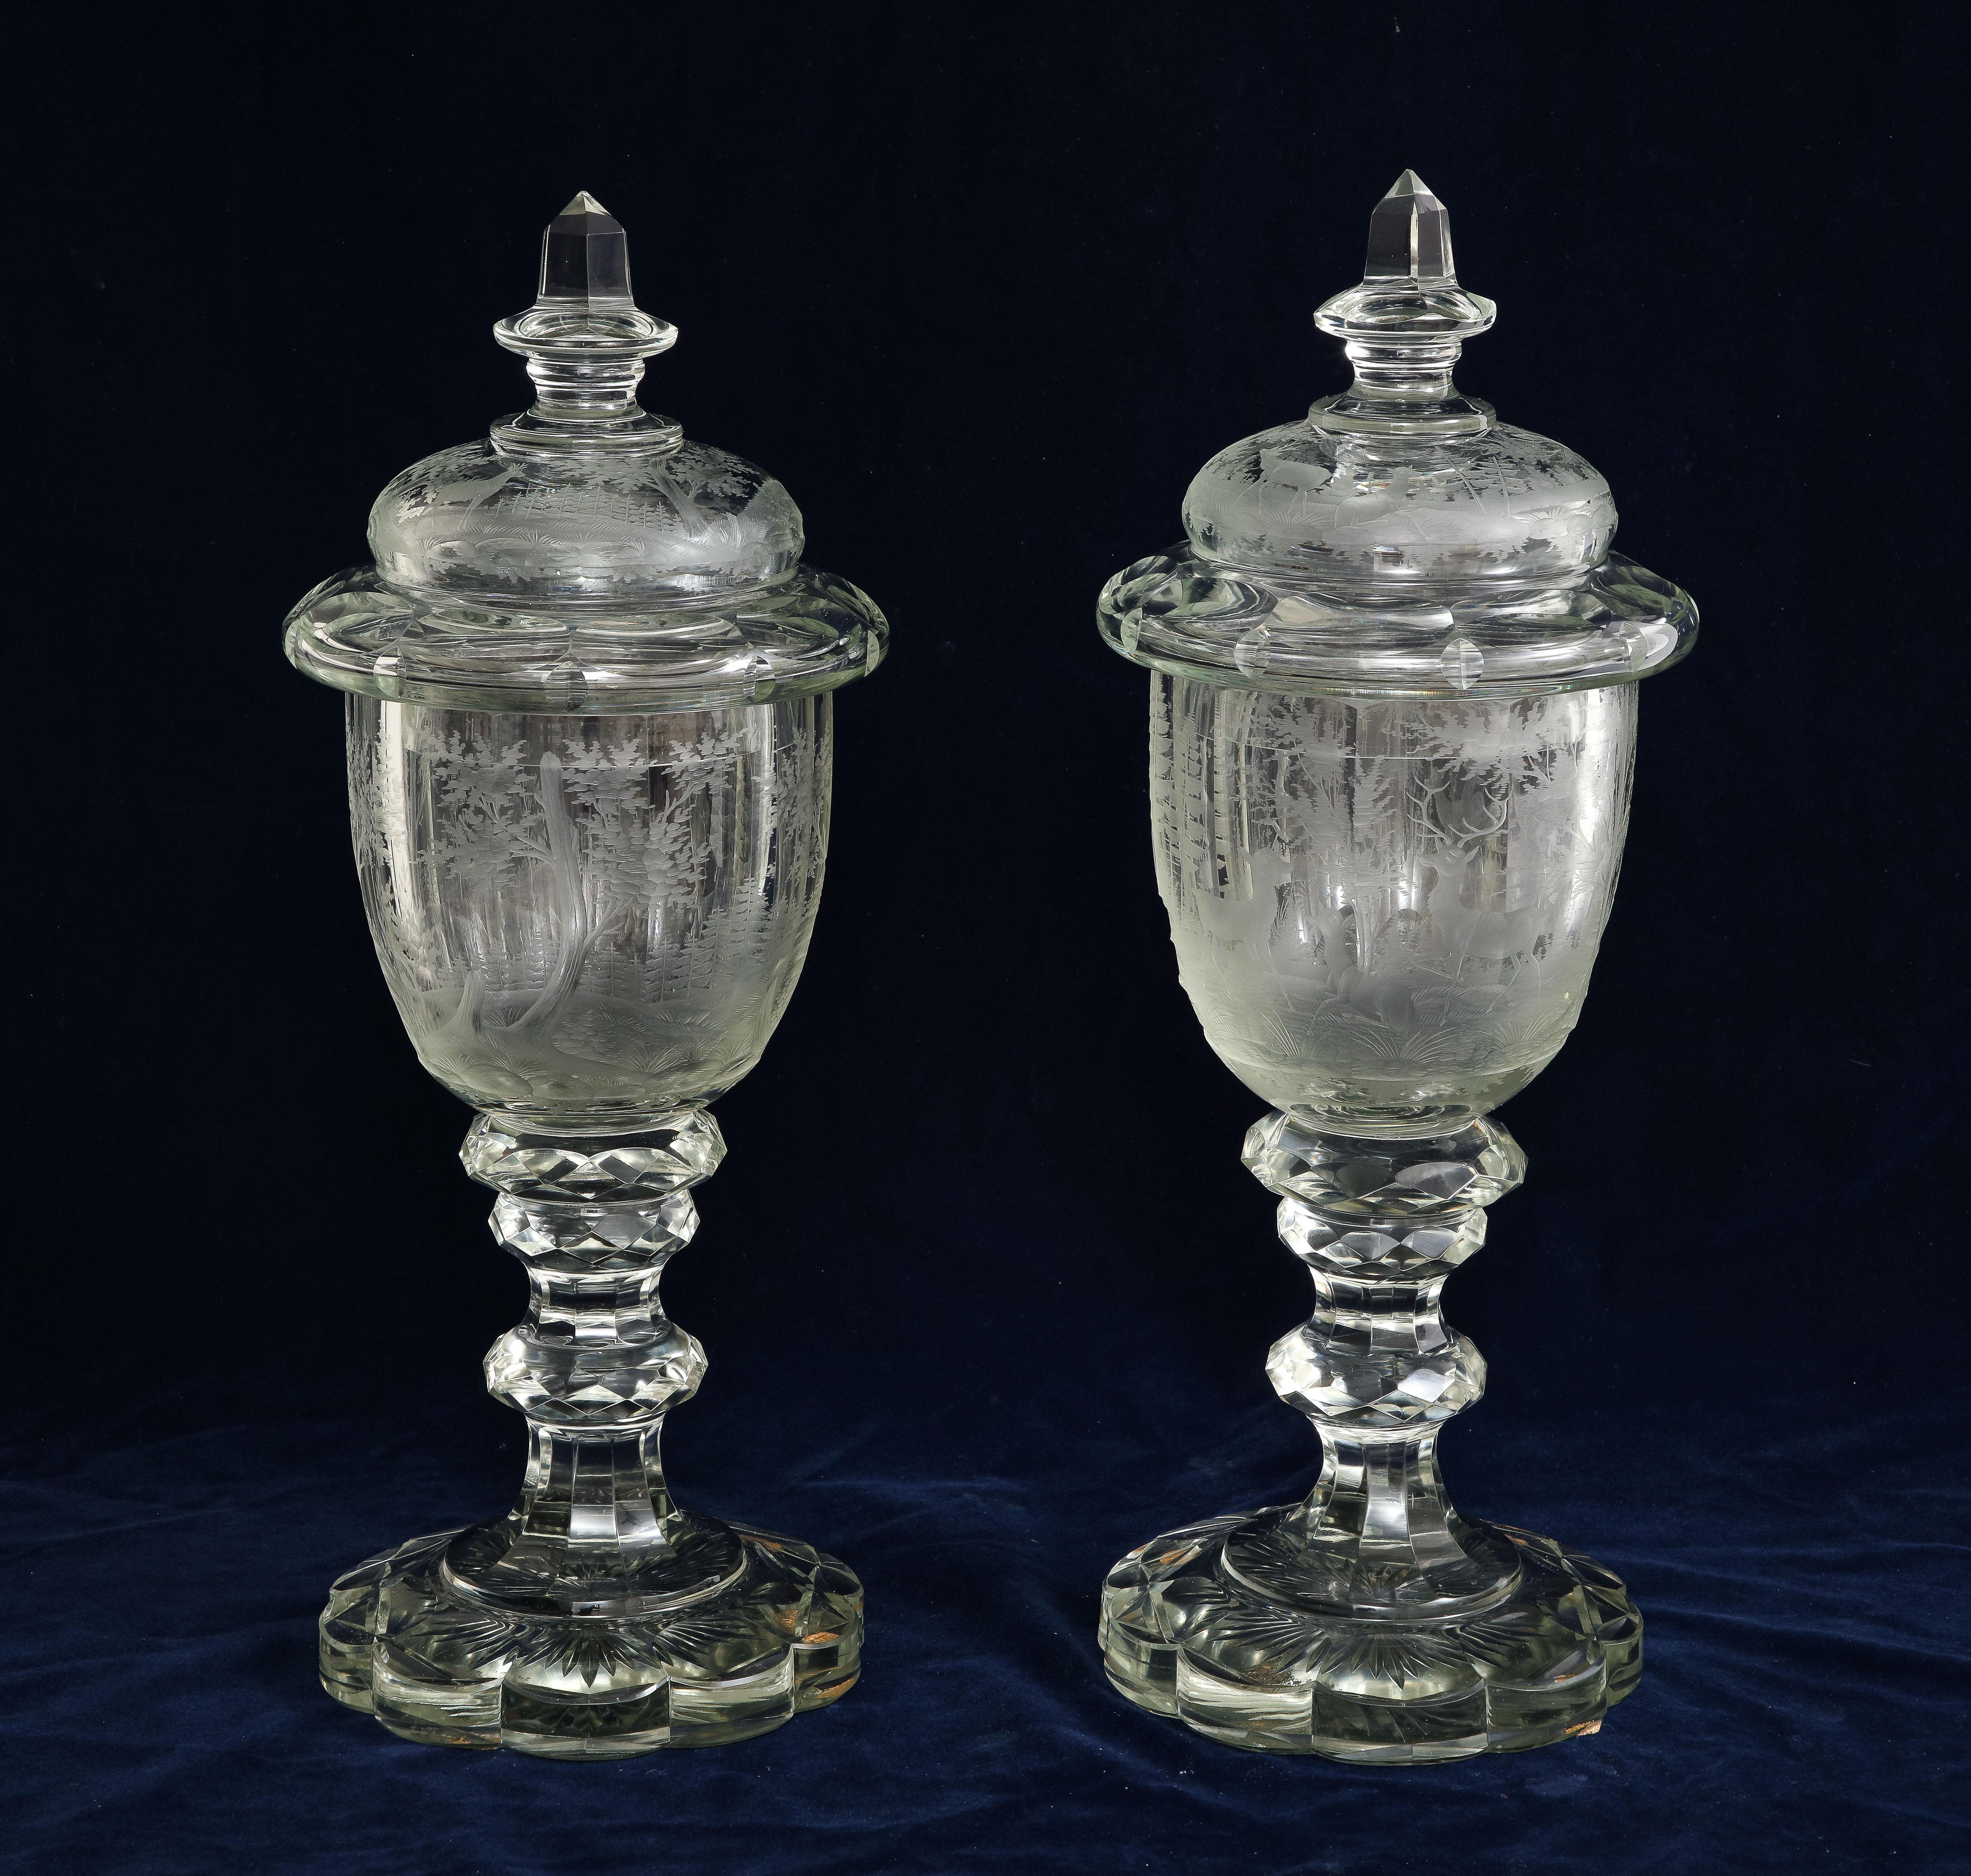 A pair of 19th century Bohemian crystal hand-engraved and acid washed covered pokals, with hunting scenes. Each crystal pokal is blown, handcut, hand-engraved, and acid washed to create a marvelous 3-Dimentinal effect of the body of the vases. Each